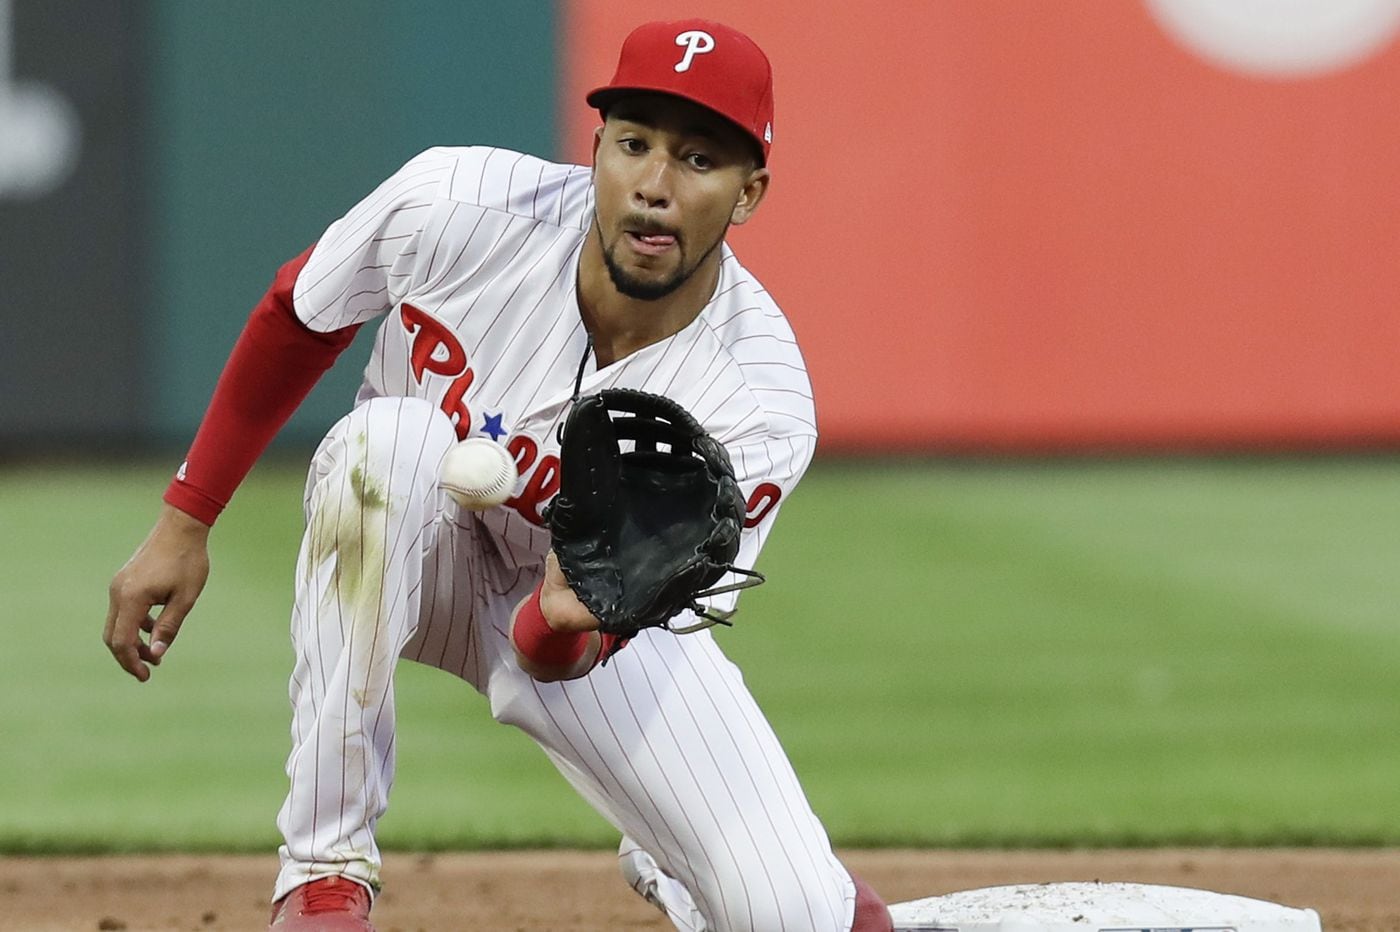 J.P. Crawford is one reason to watch the Phillies